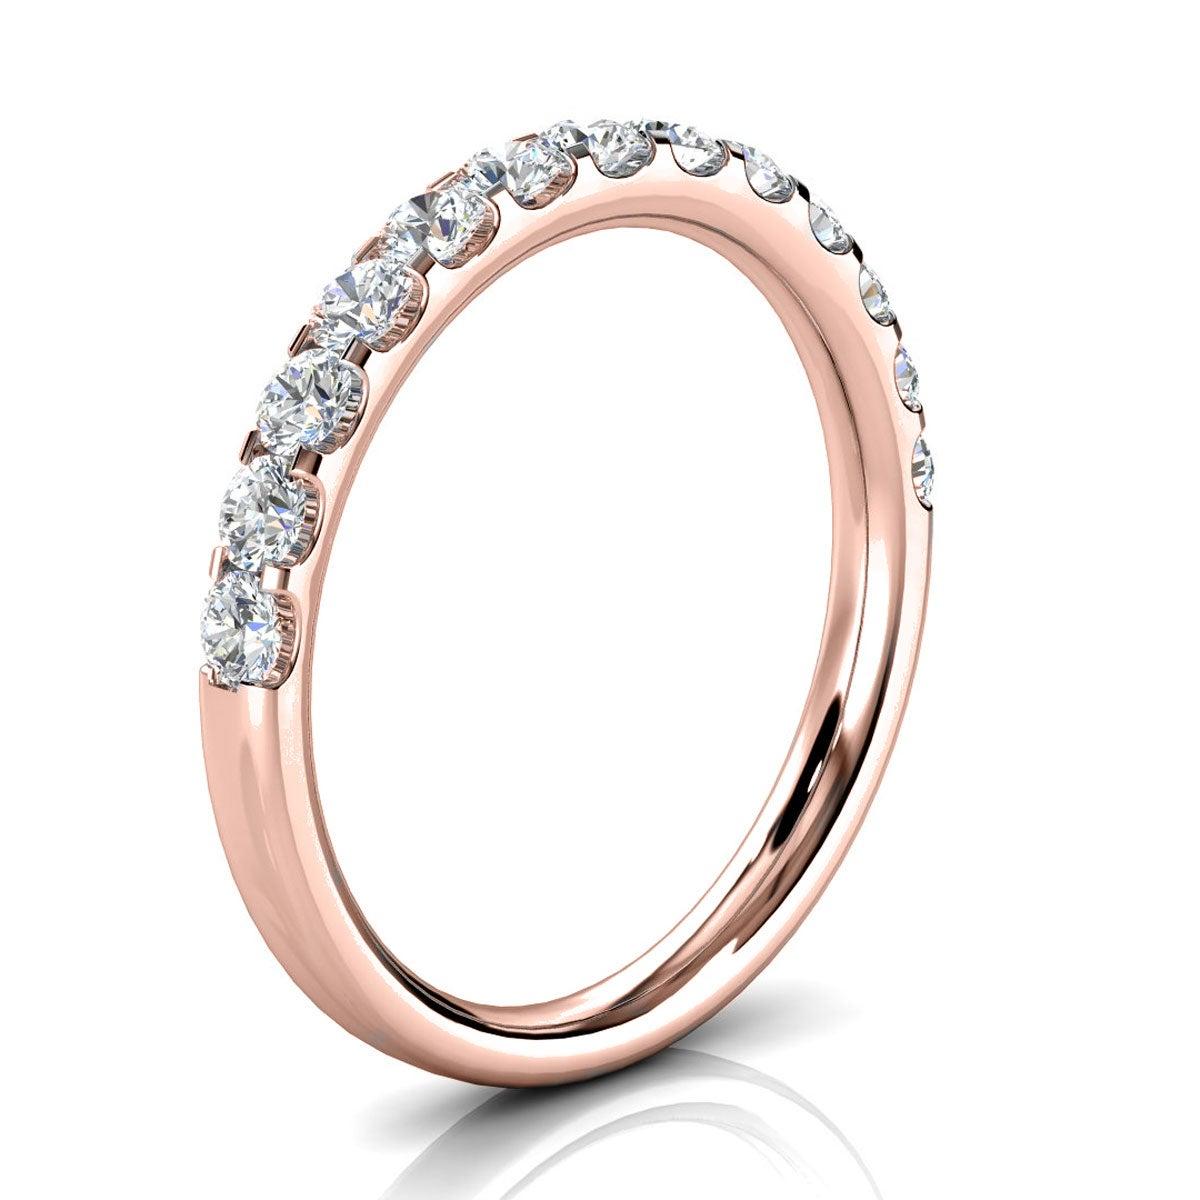 For Sale:  18K Rose Gold Valerie Micro-Prong Diamond Ring '1/2 Ct. tw' 2